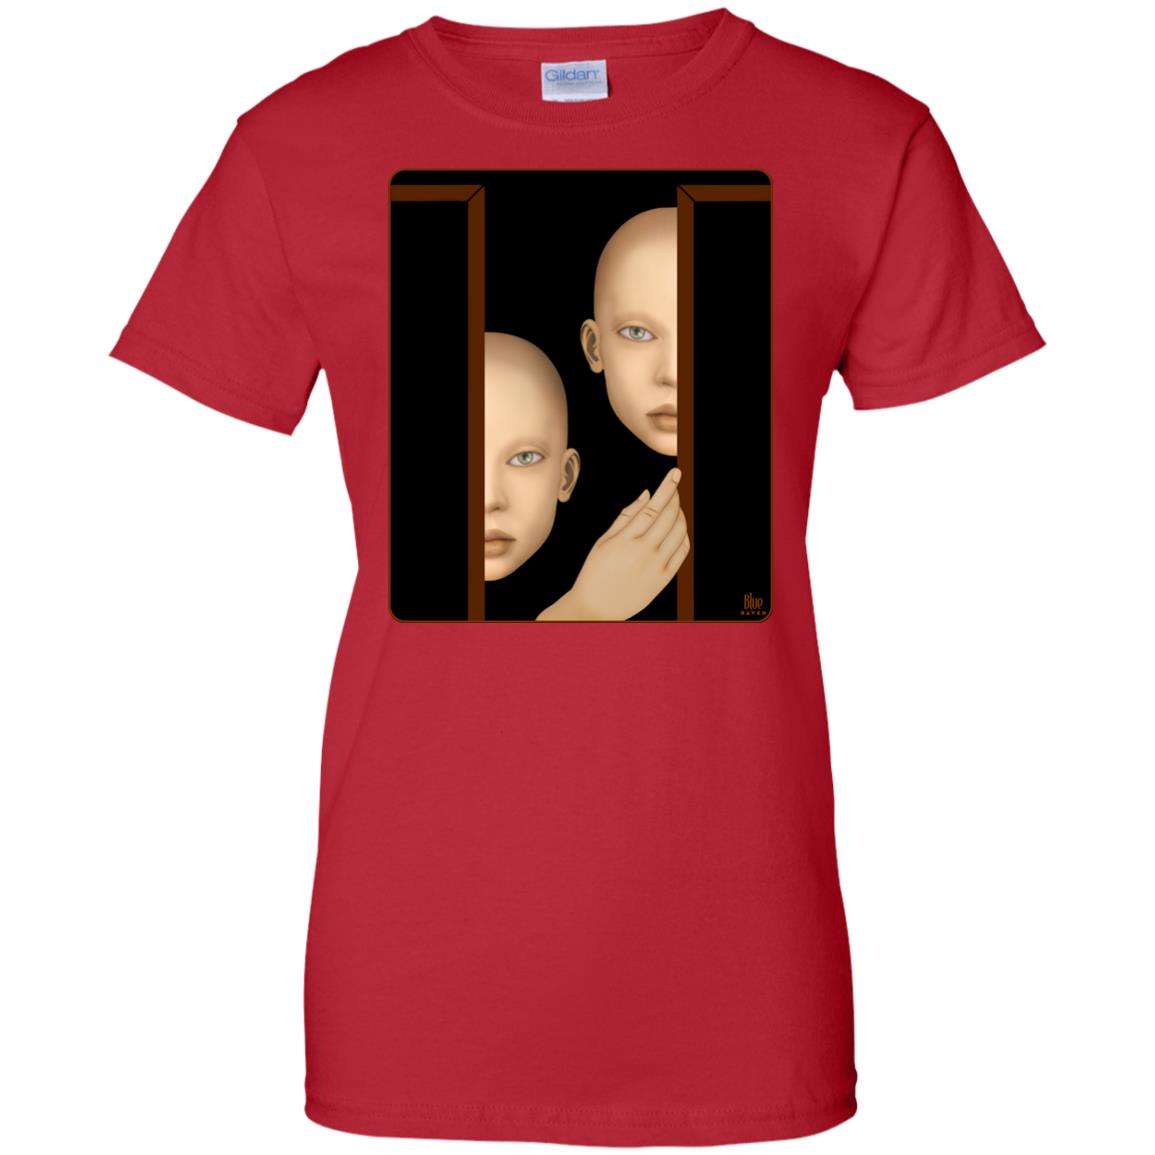 THE WATCHERS - Women's Relaxed Fit T-Shirt